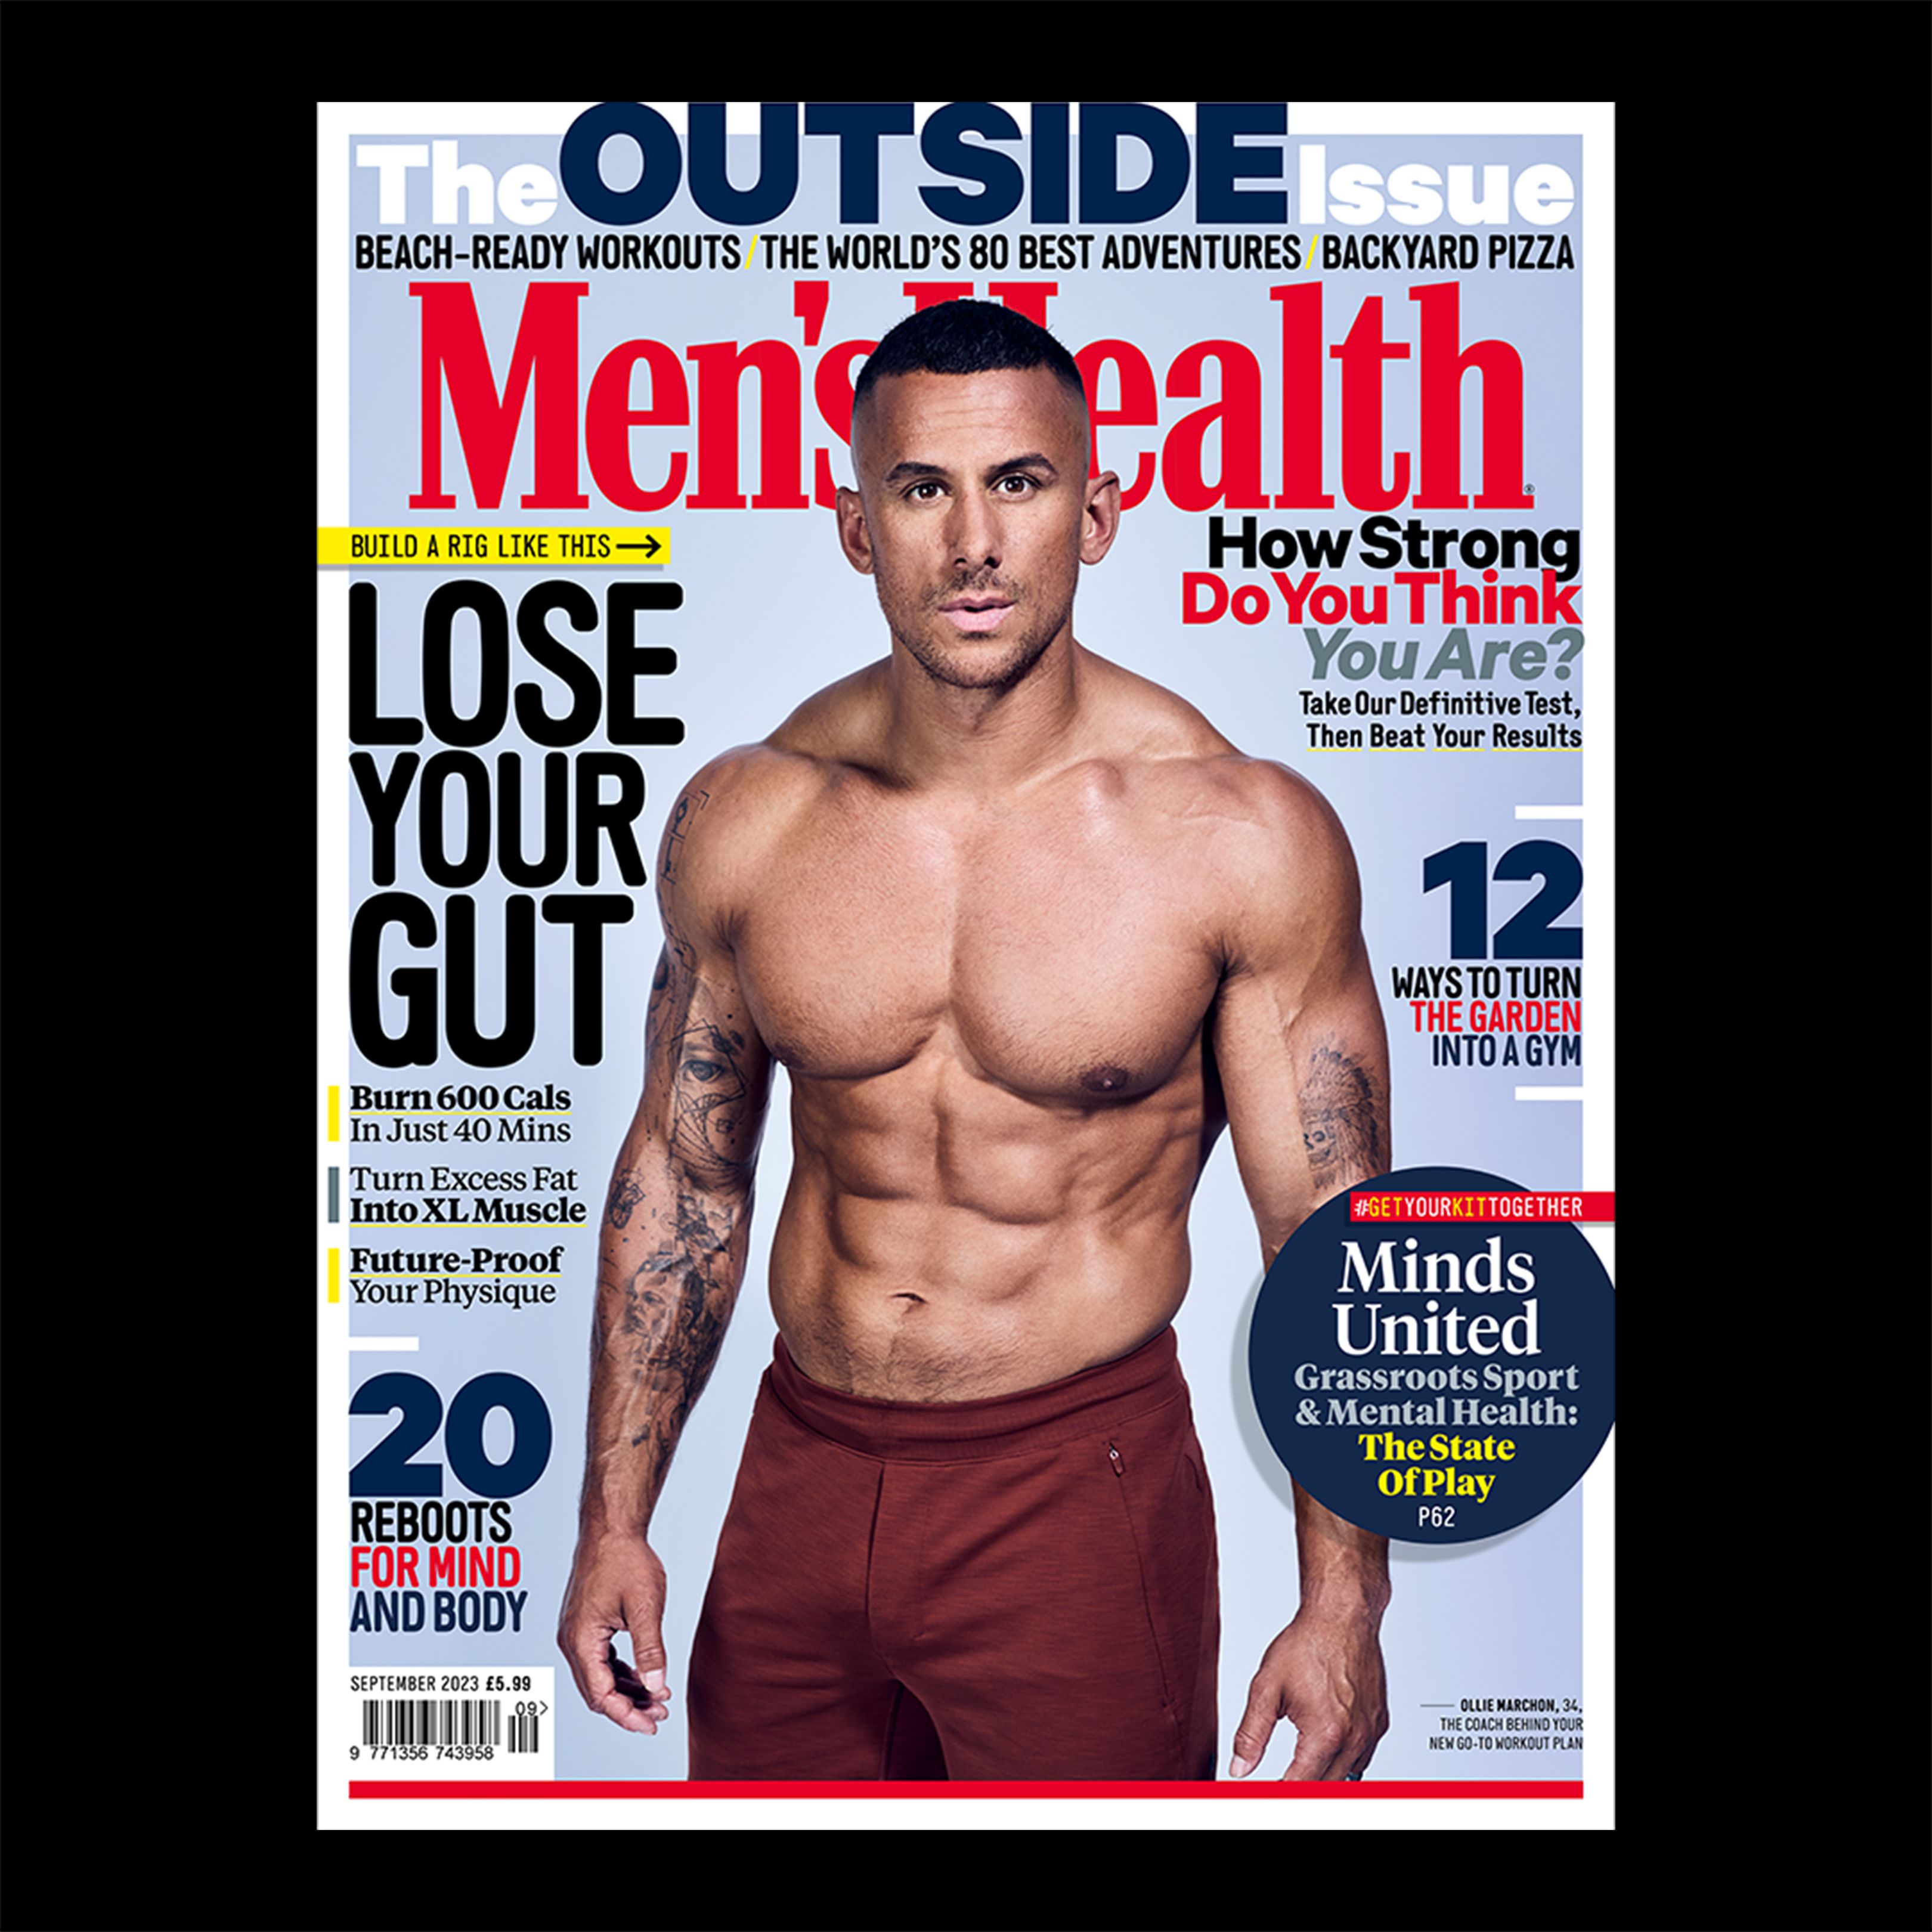 6 Great Reasons To Buy the September Issue of Mens Health